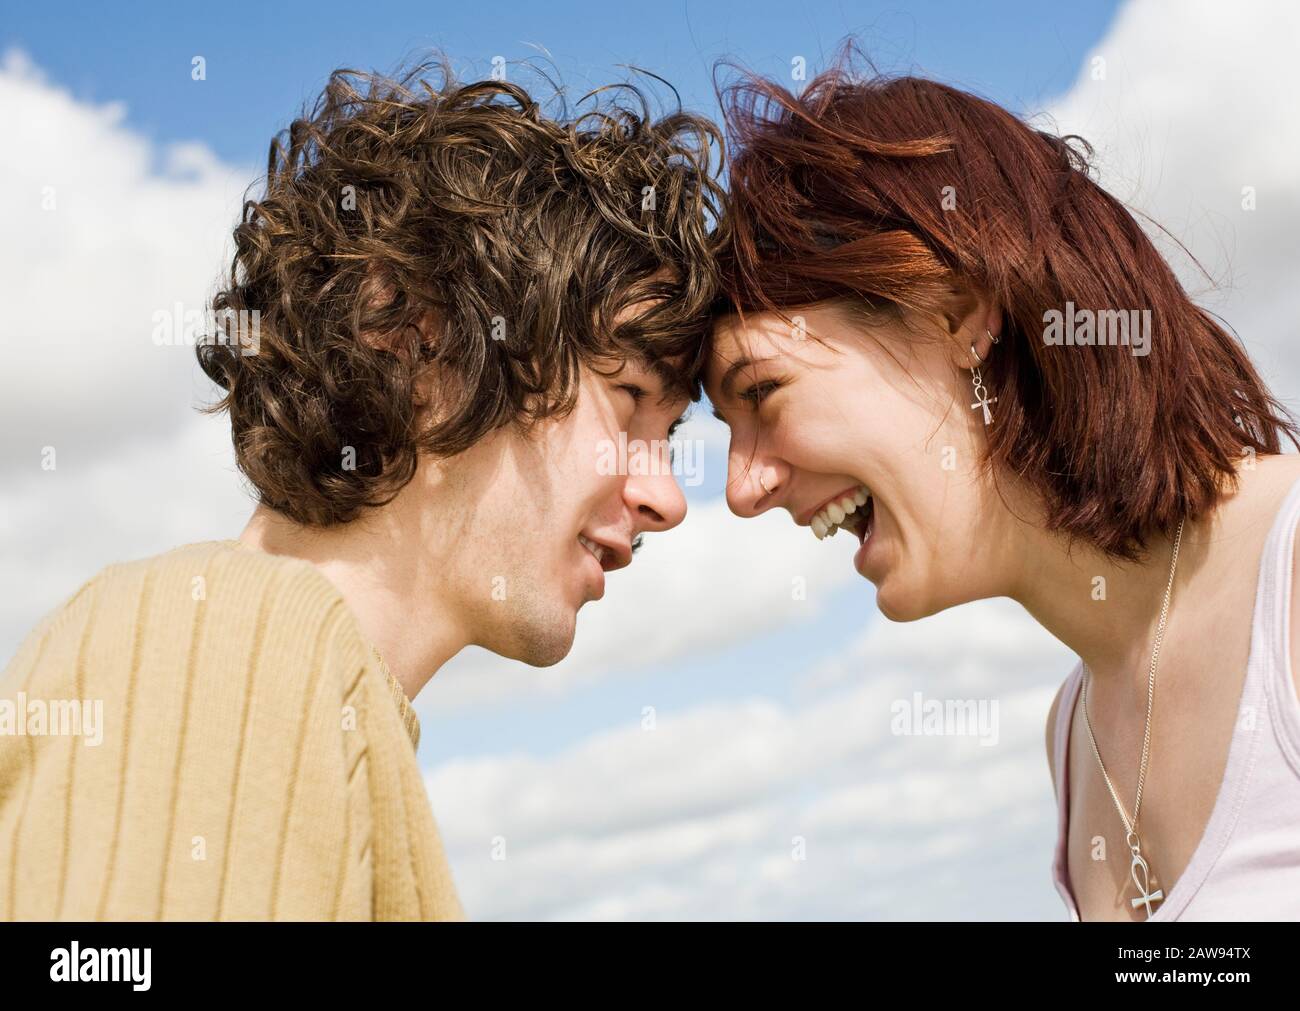 A teenage couple laughing and smiling with their heads together outdoors Stock Photo